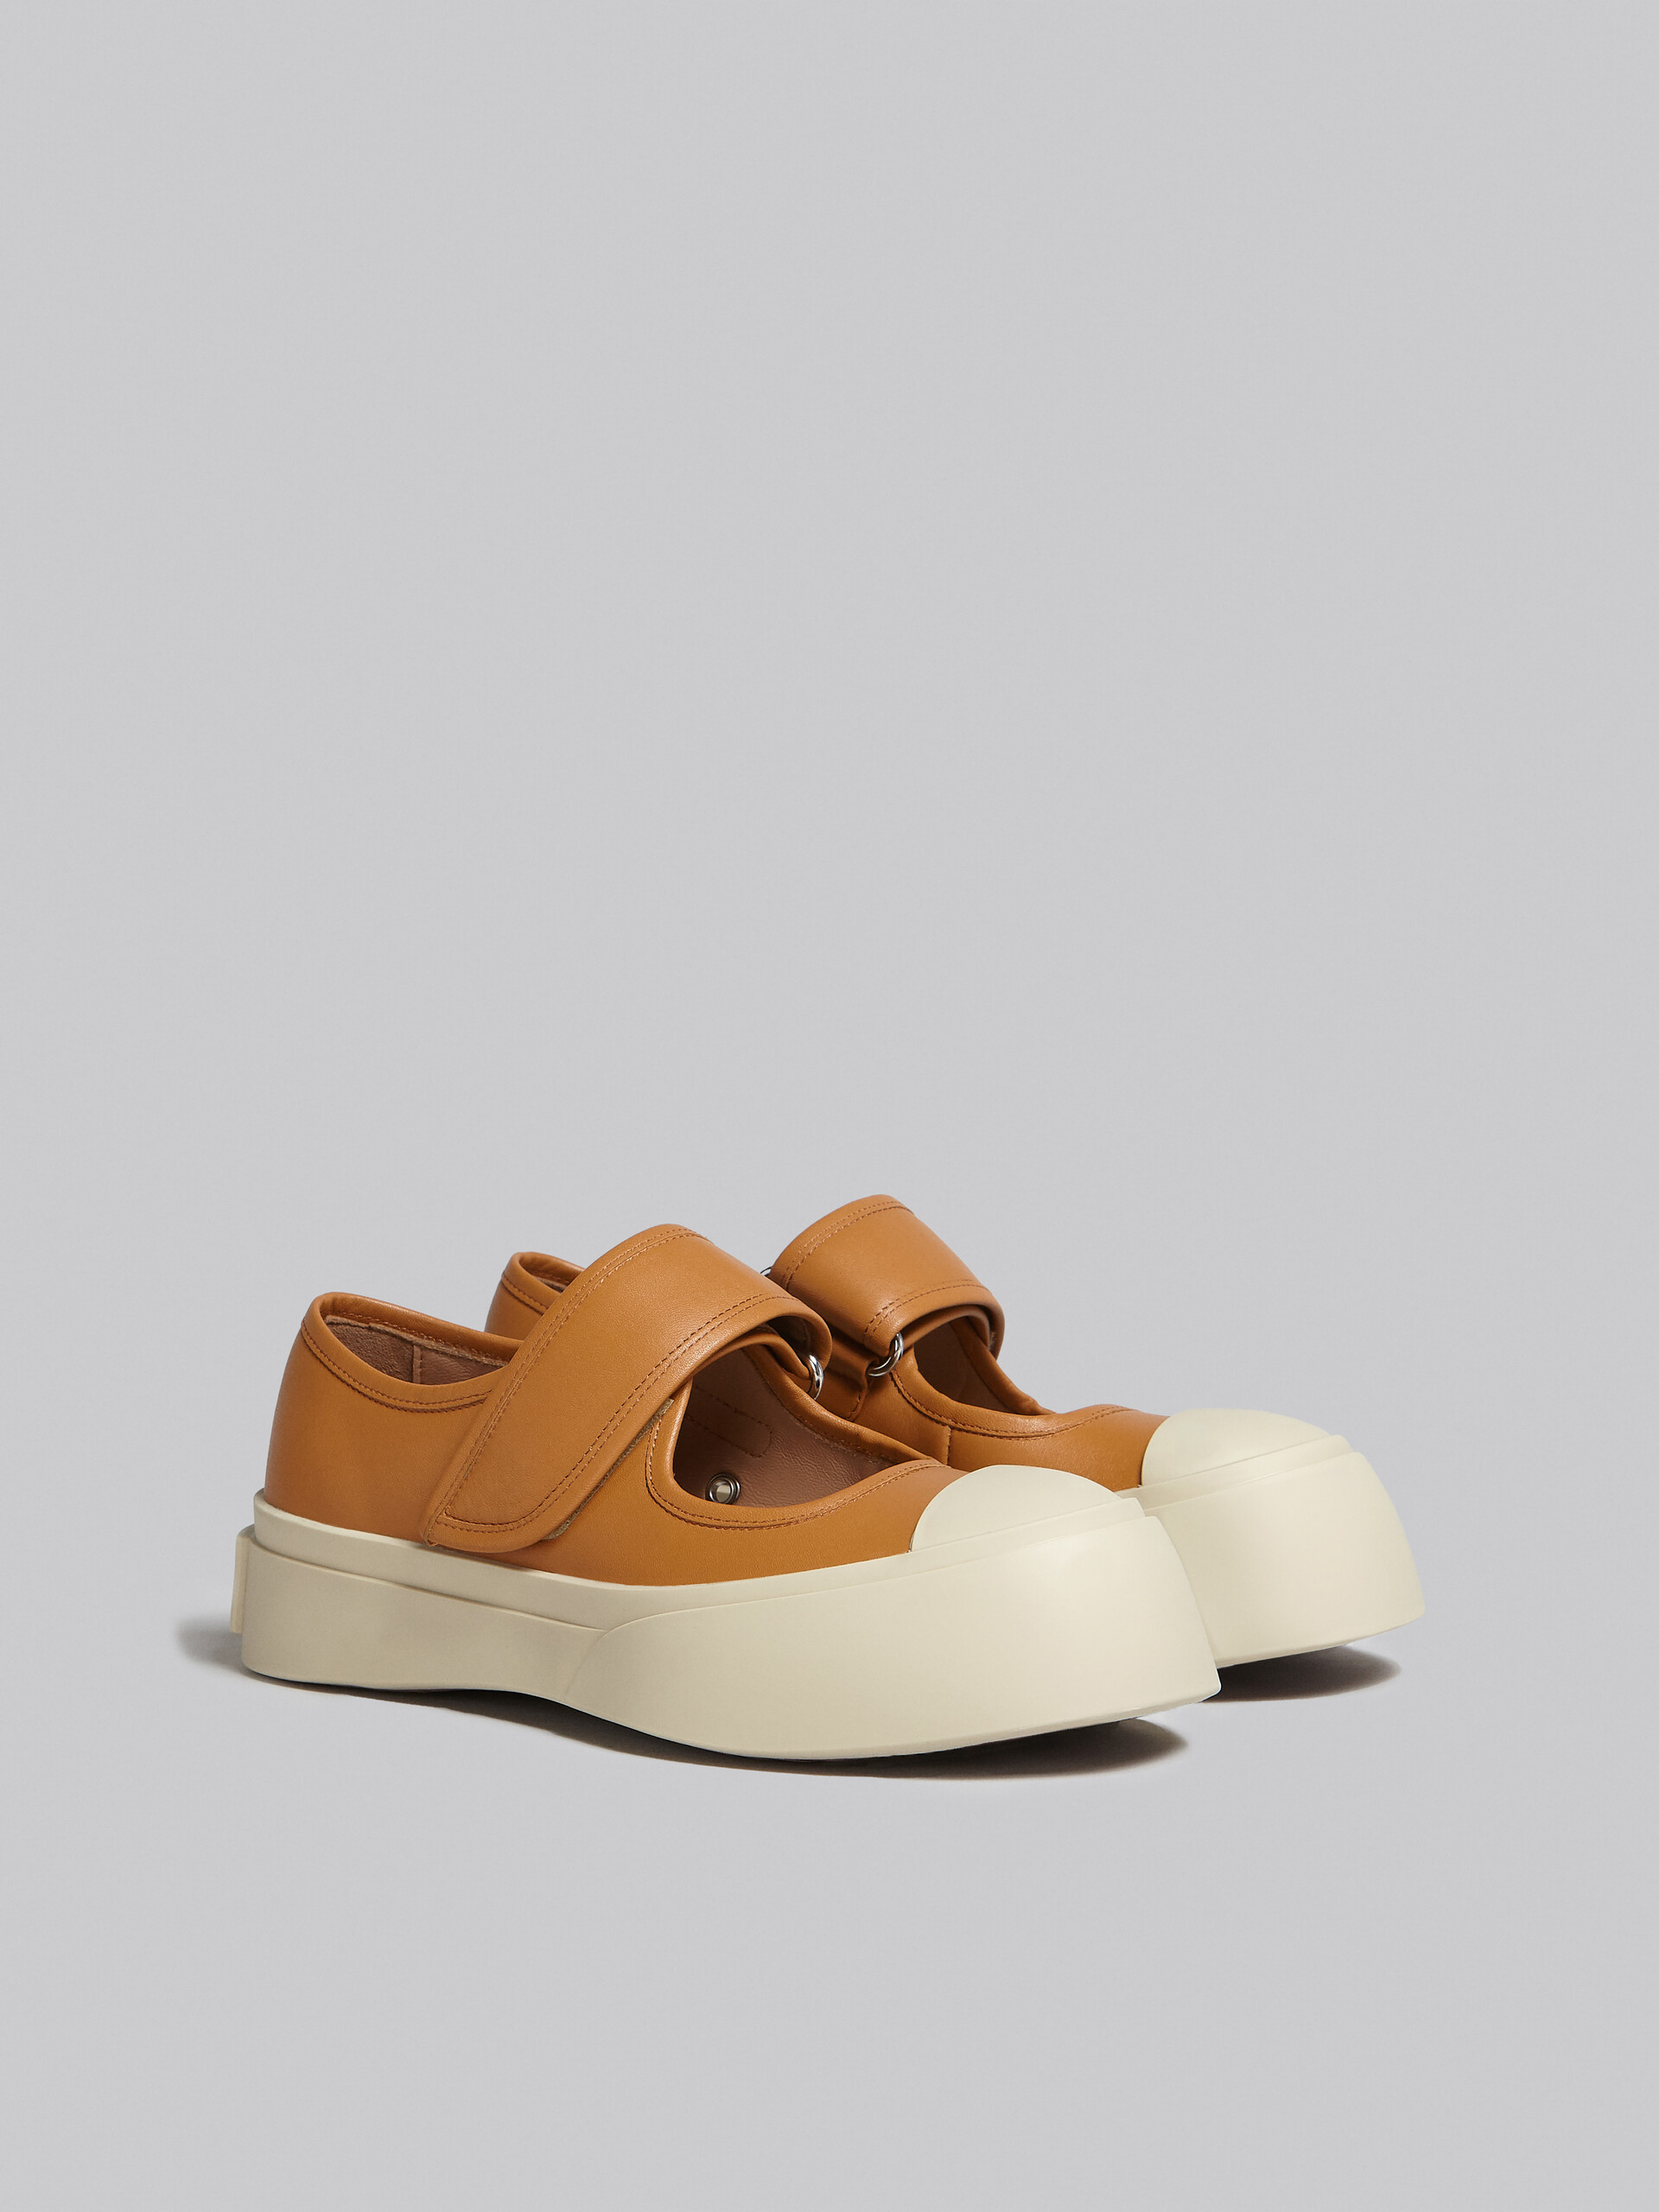 Brown nappa leather Mary Jane sneaker - Sneakers - Image 2